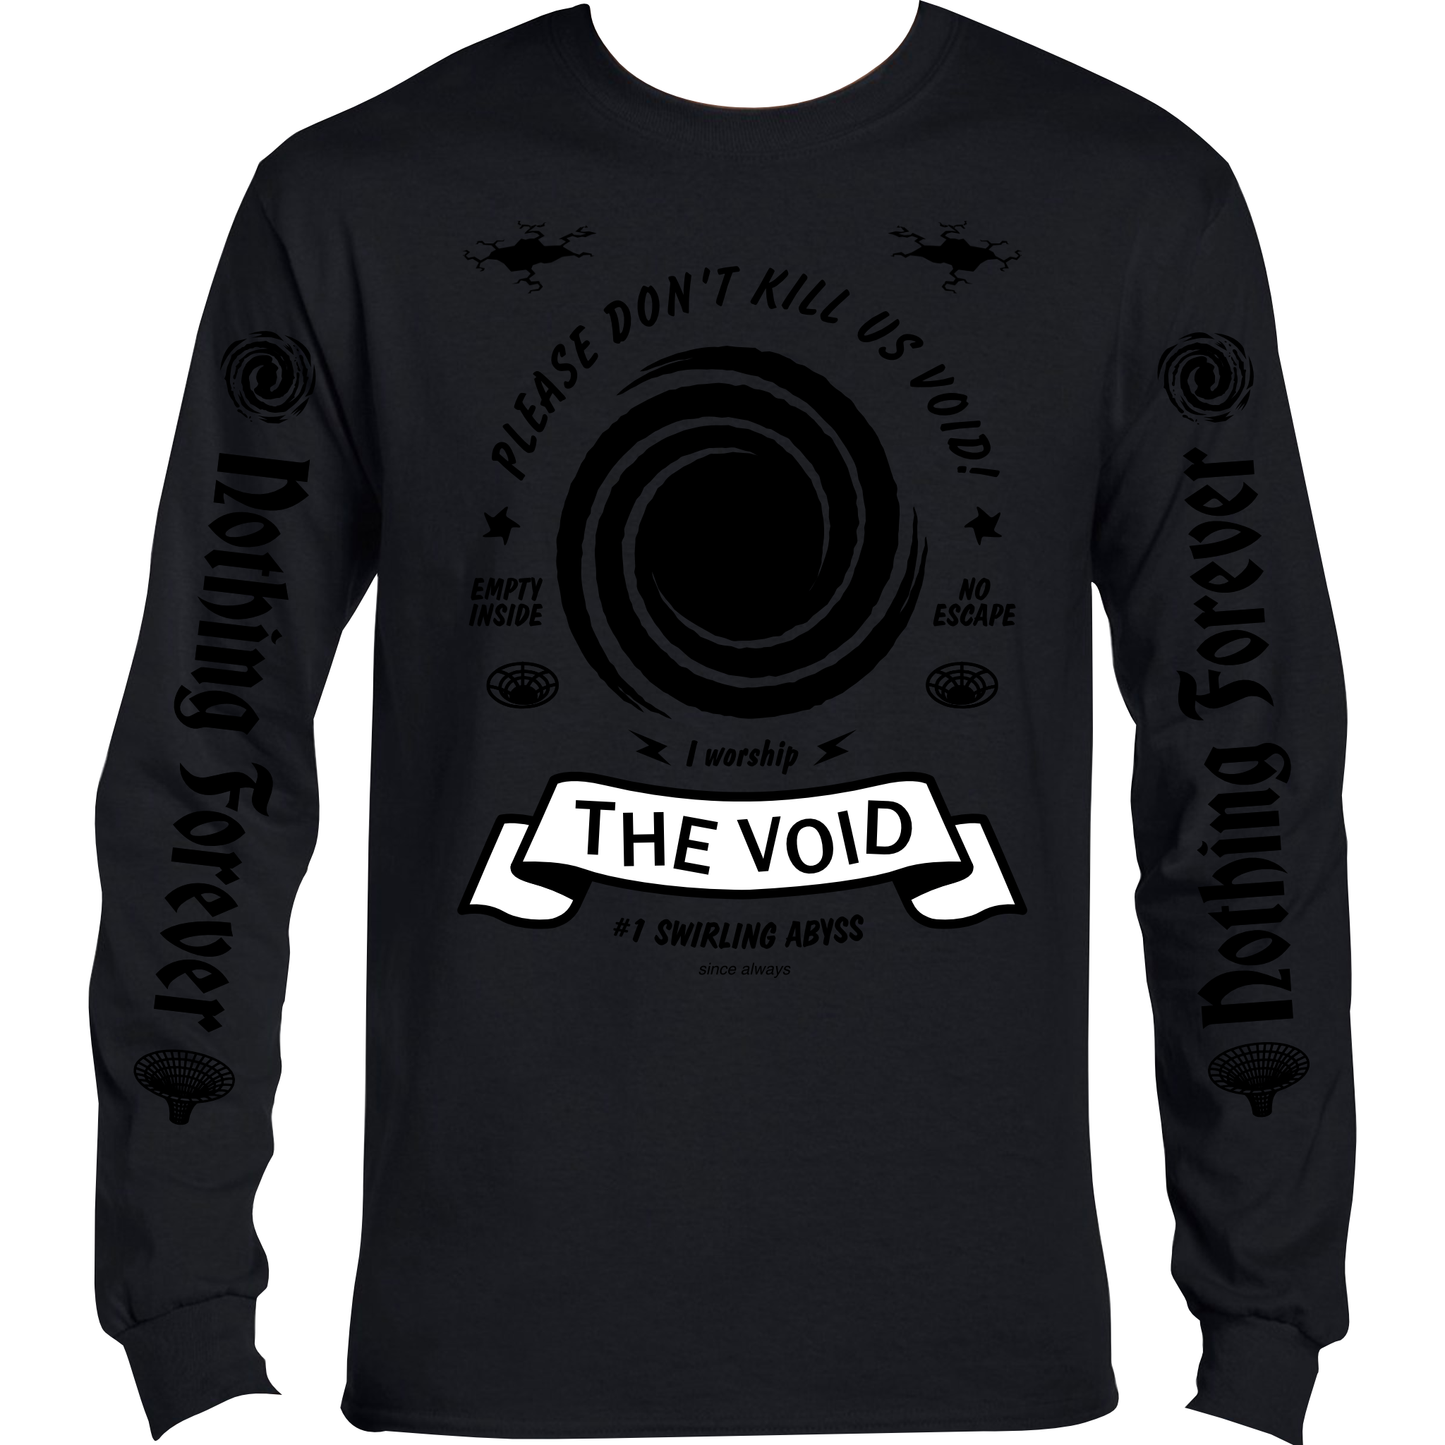 "Please Don't Kill us Void" Long-Sleeved t-shirt